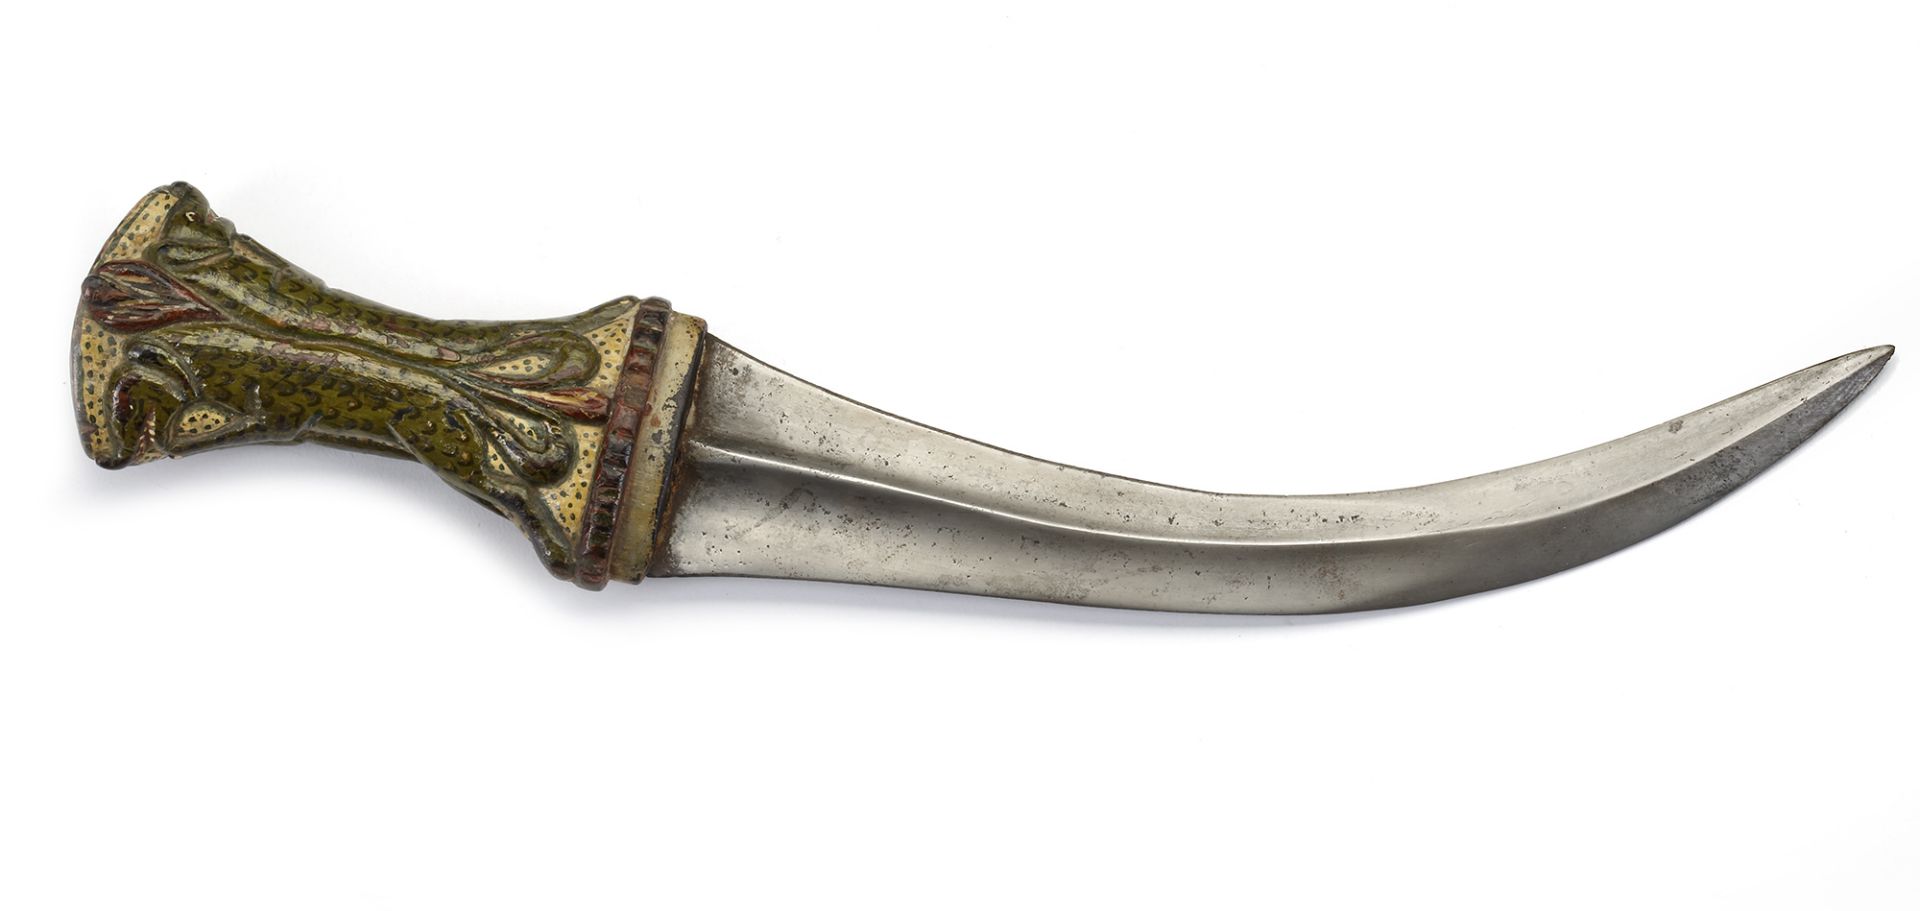 A MUGHAL DAGGER WITH WOODEN HILT, NORTH-INDIA, 19TH CENTURY - Image 3 of 4